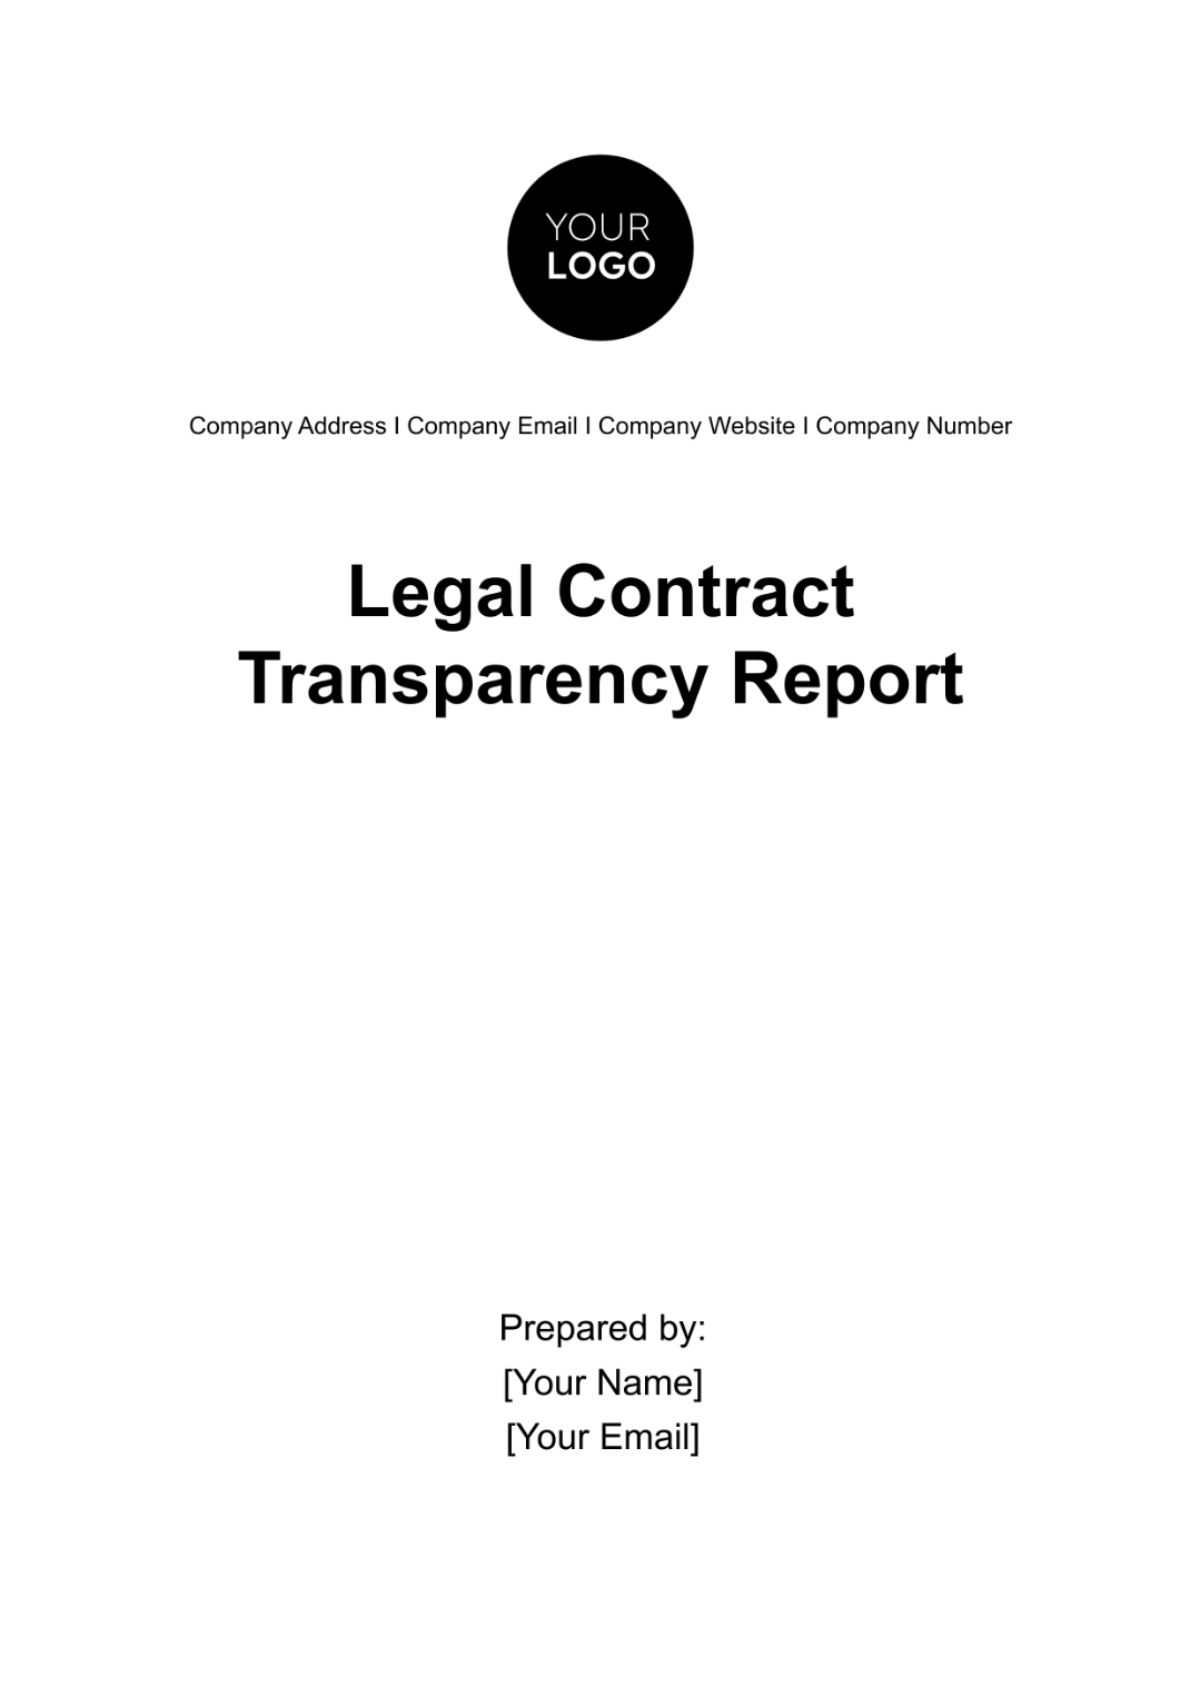 Legal Contract Transparency Report Template